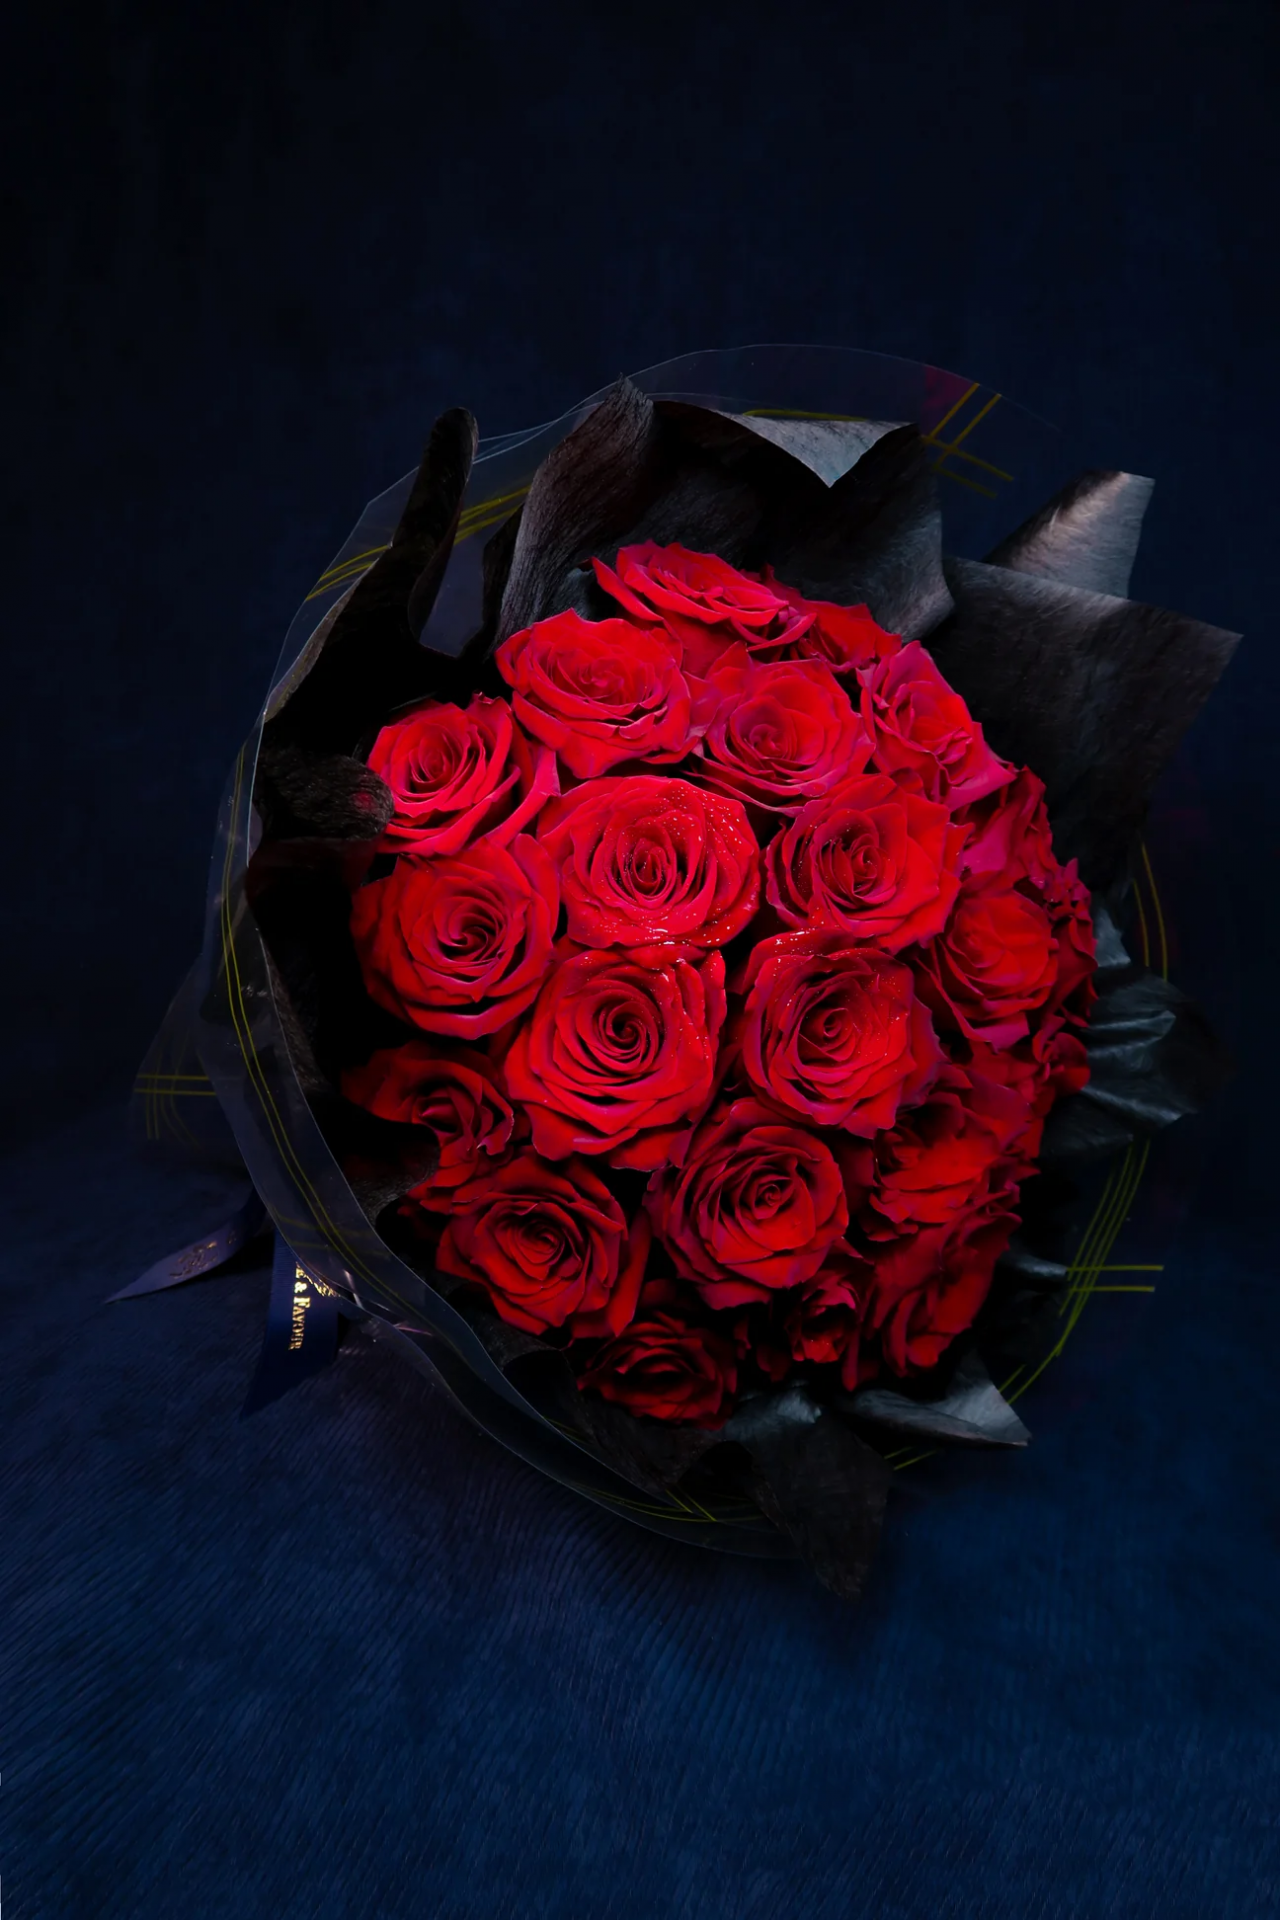 5 romantic blooms to order in Hong Kong this Valentines Day